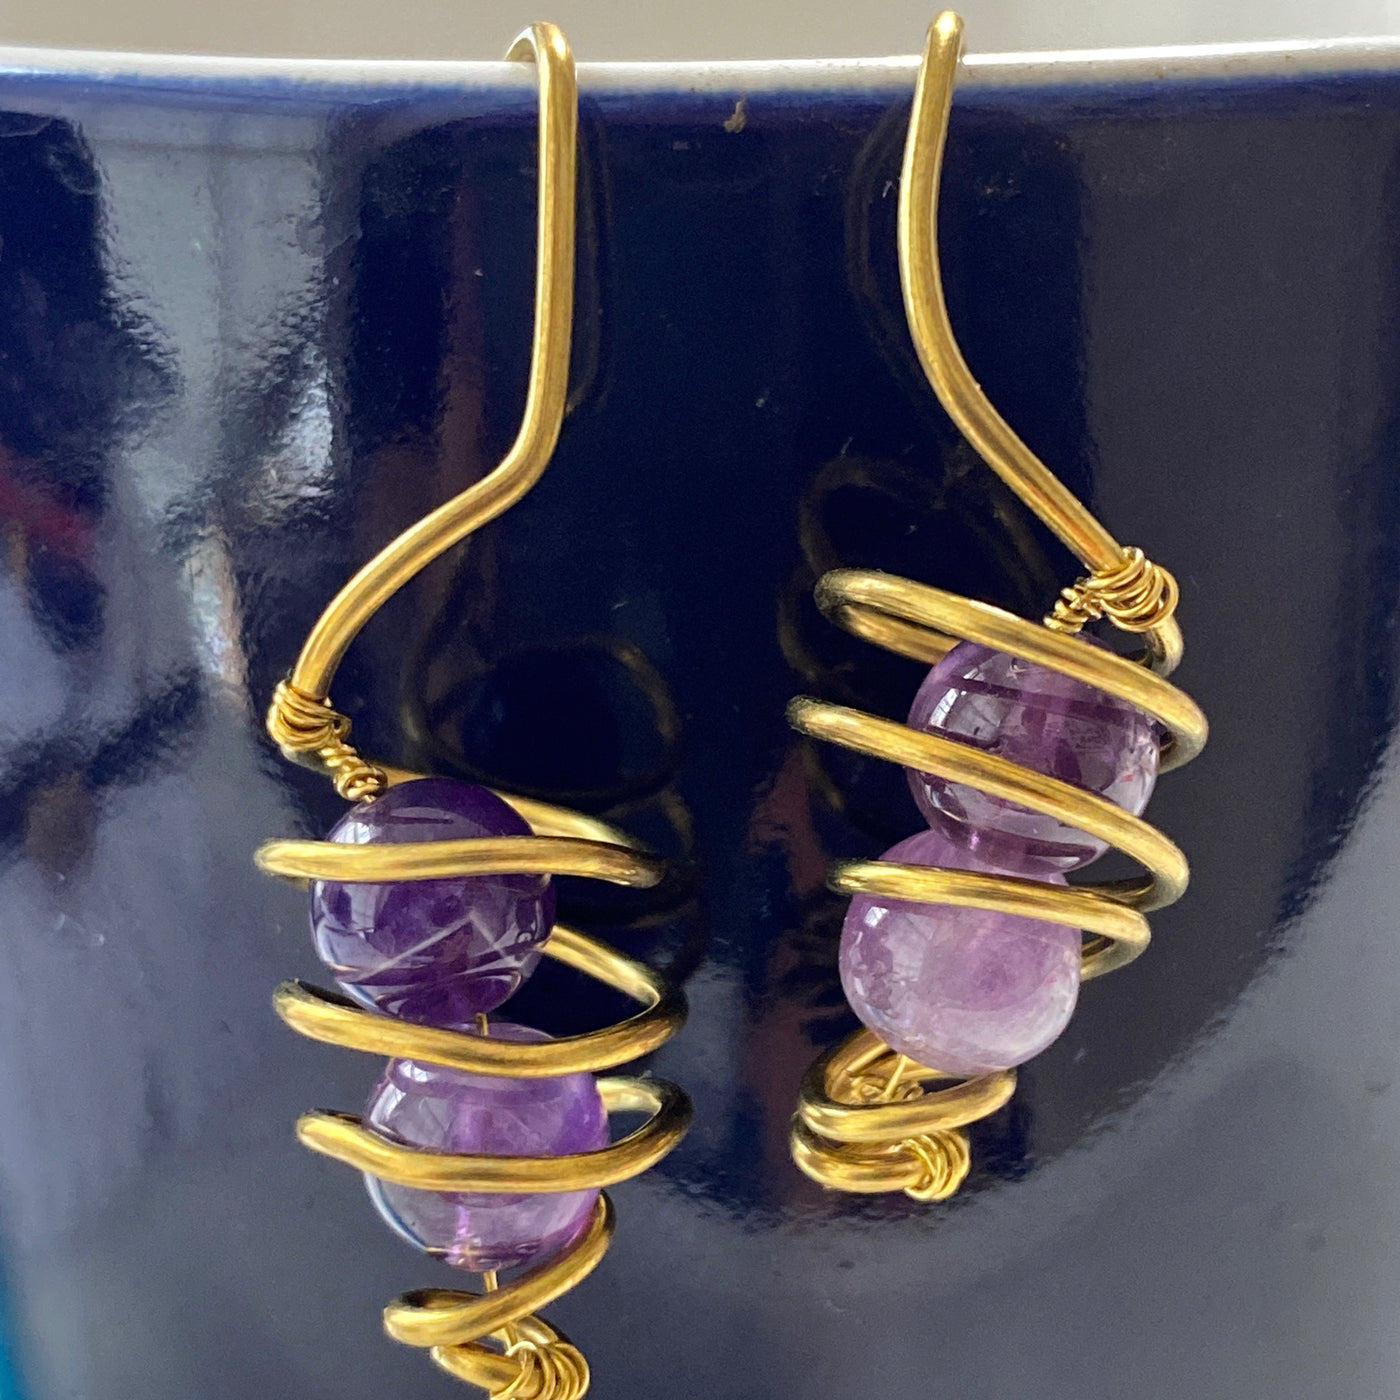 Amethyst wrapped in wire earrings. Shake and Move collection.